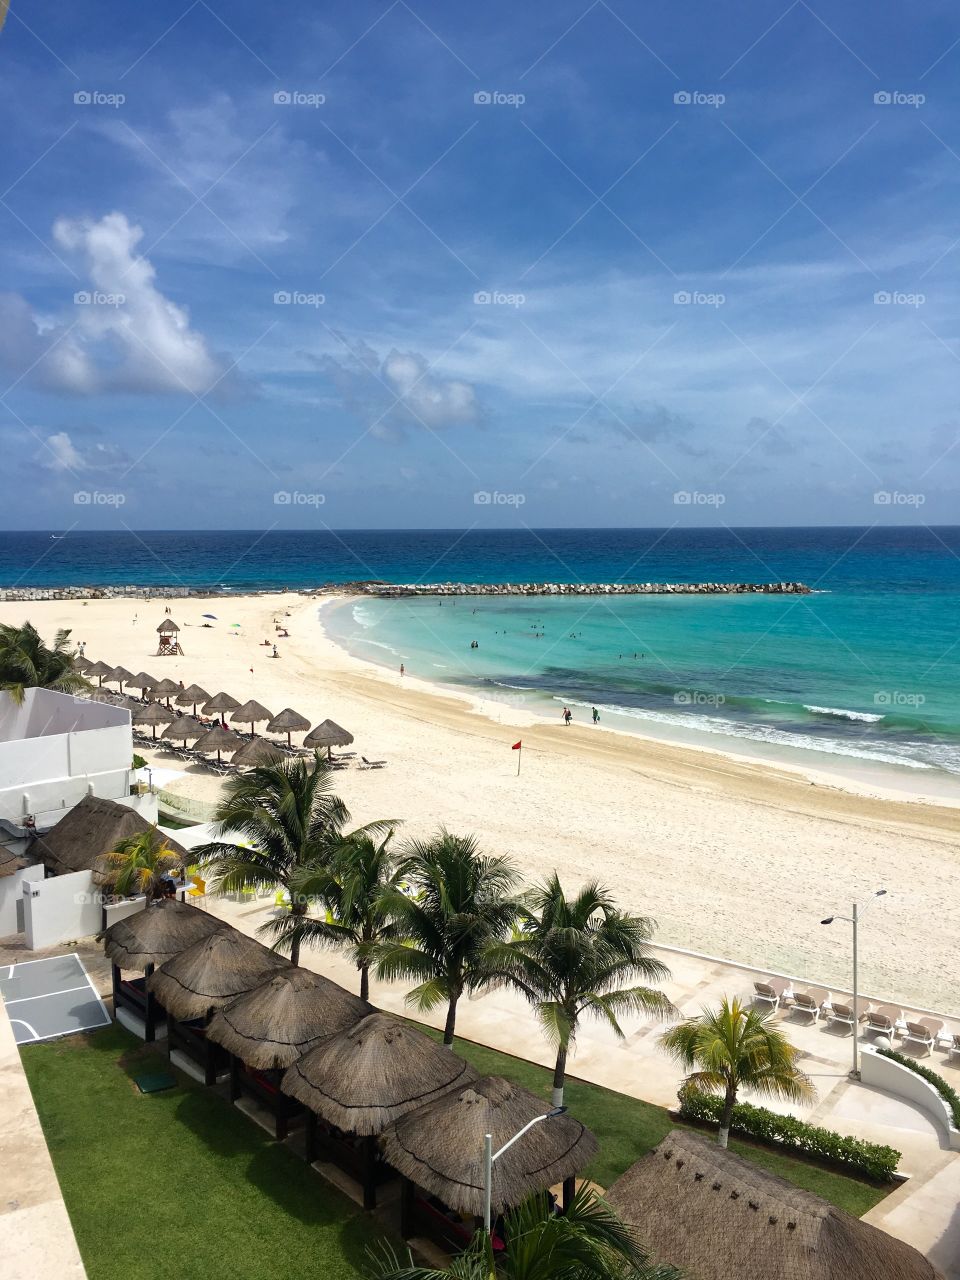 Cancun beach view from the Krystal hotel. 